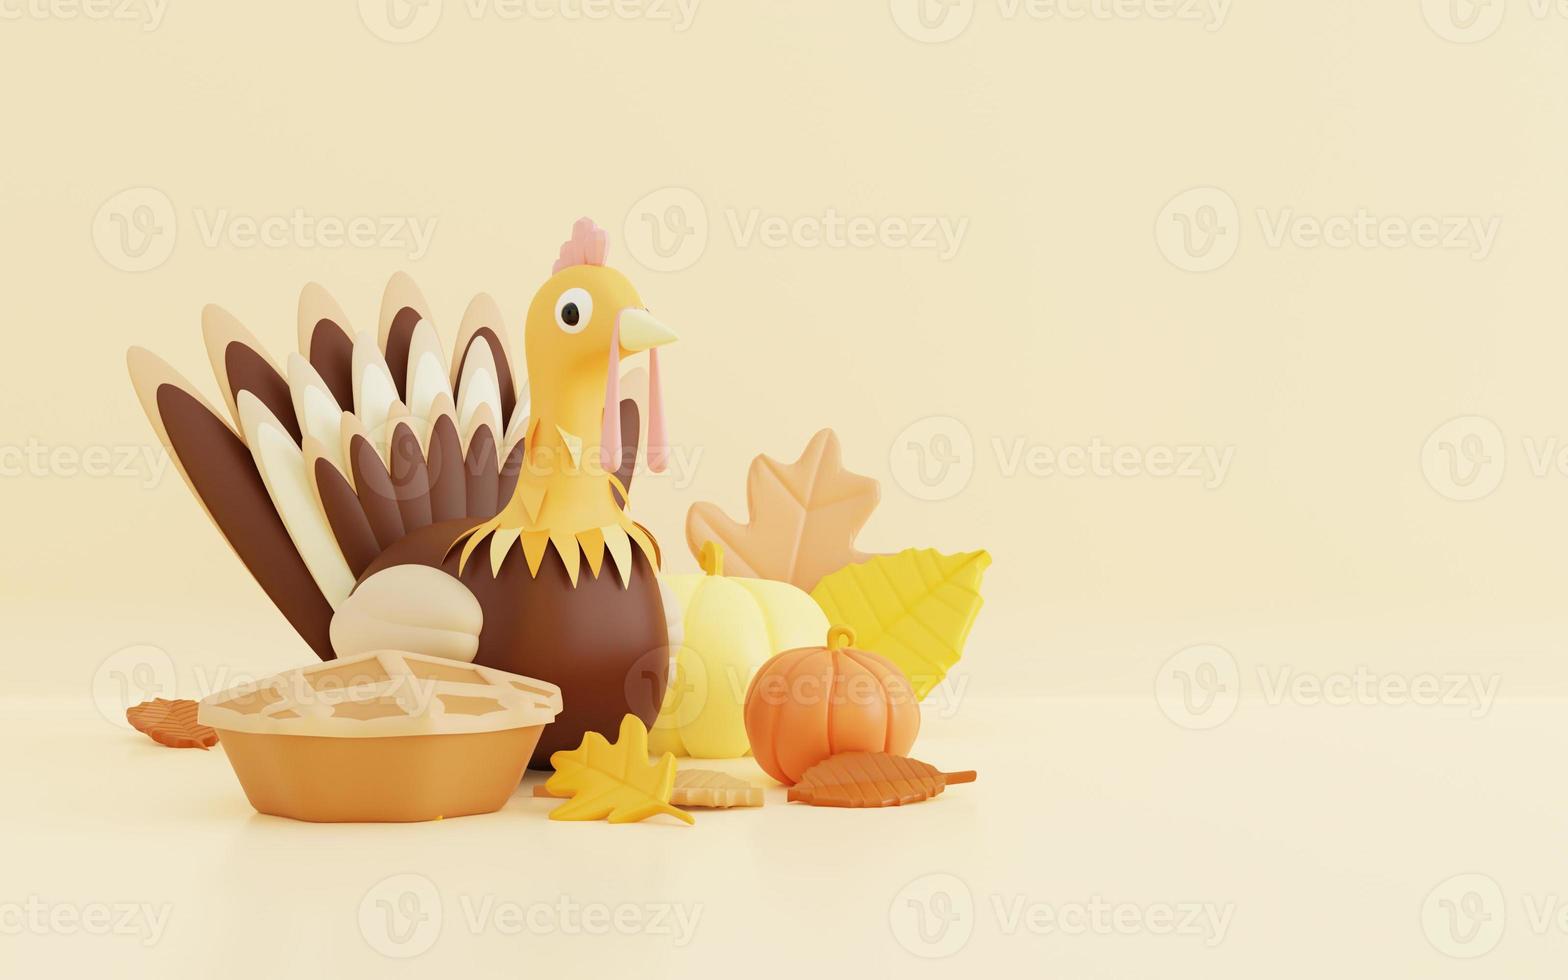 3d thanksgiving illustration with cute turkey photo